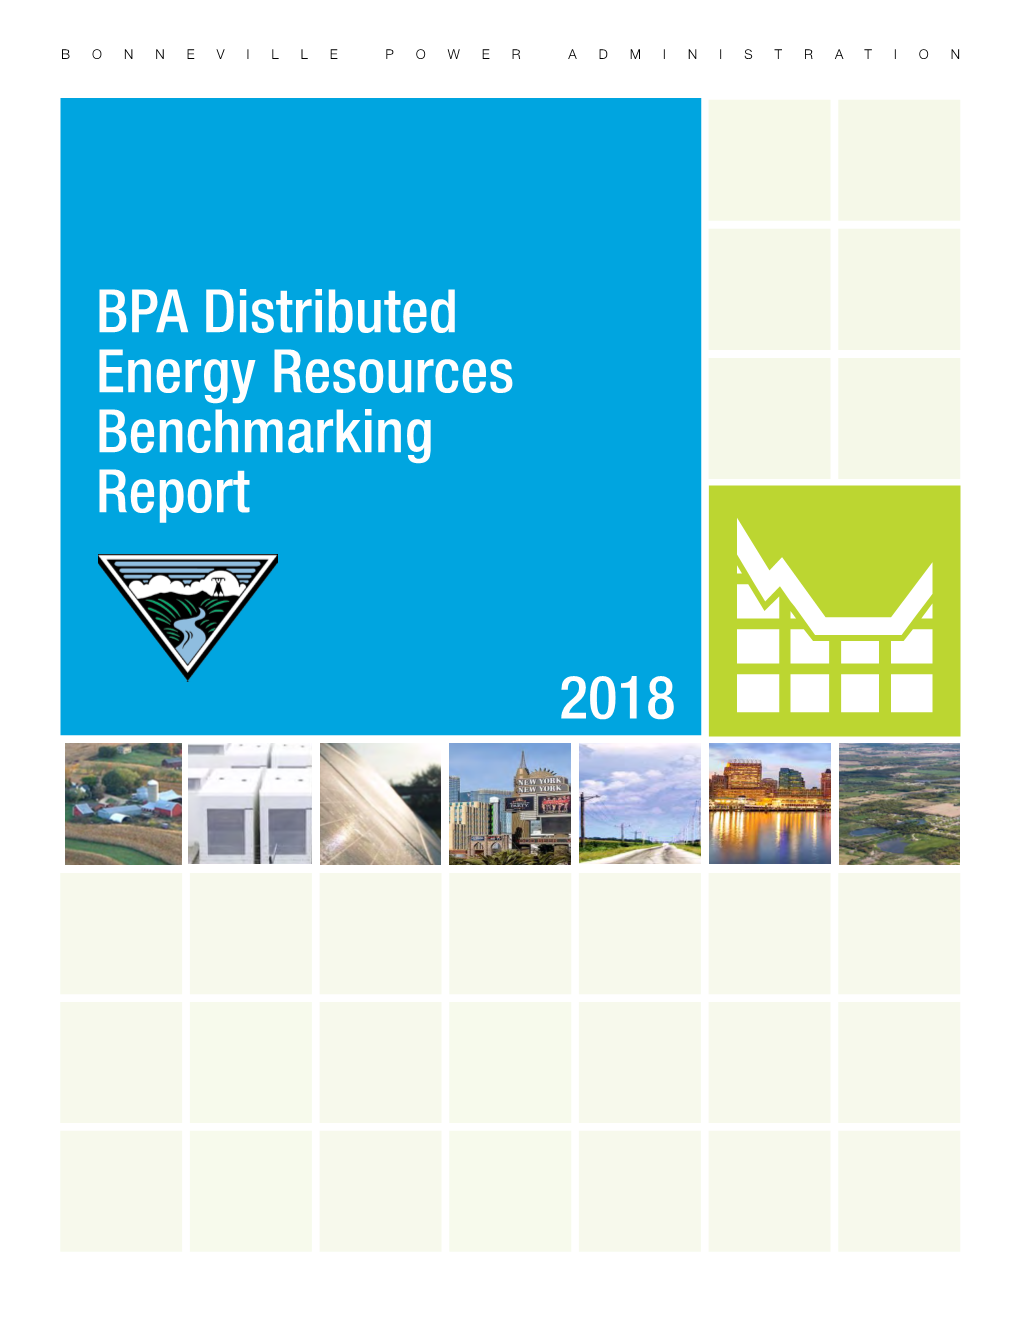 BPA Distributed Energy Resources Benchmarking Report 2018